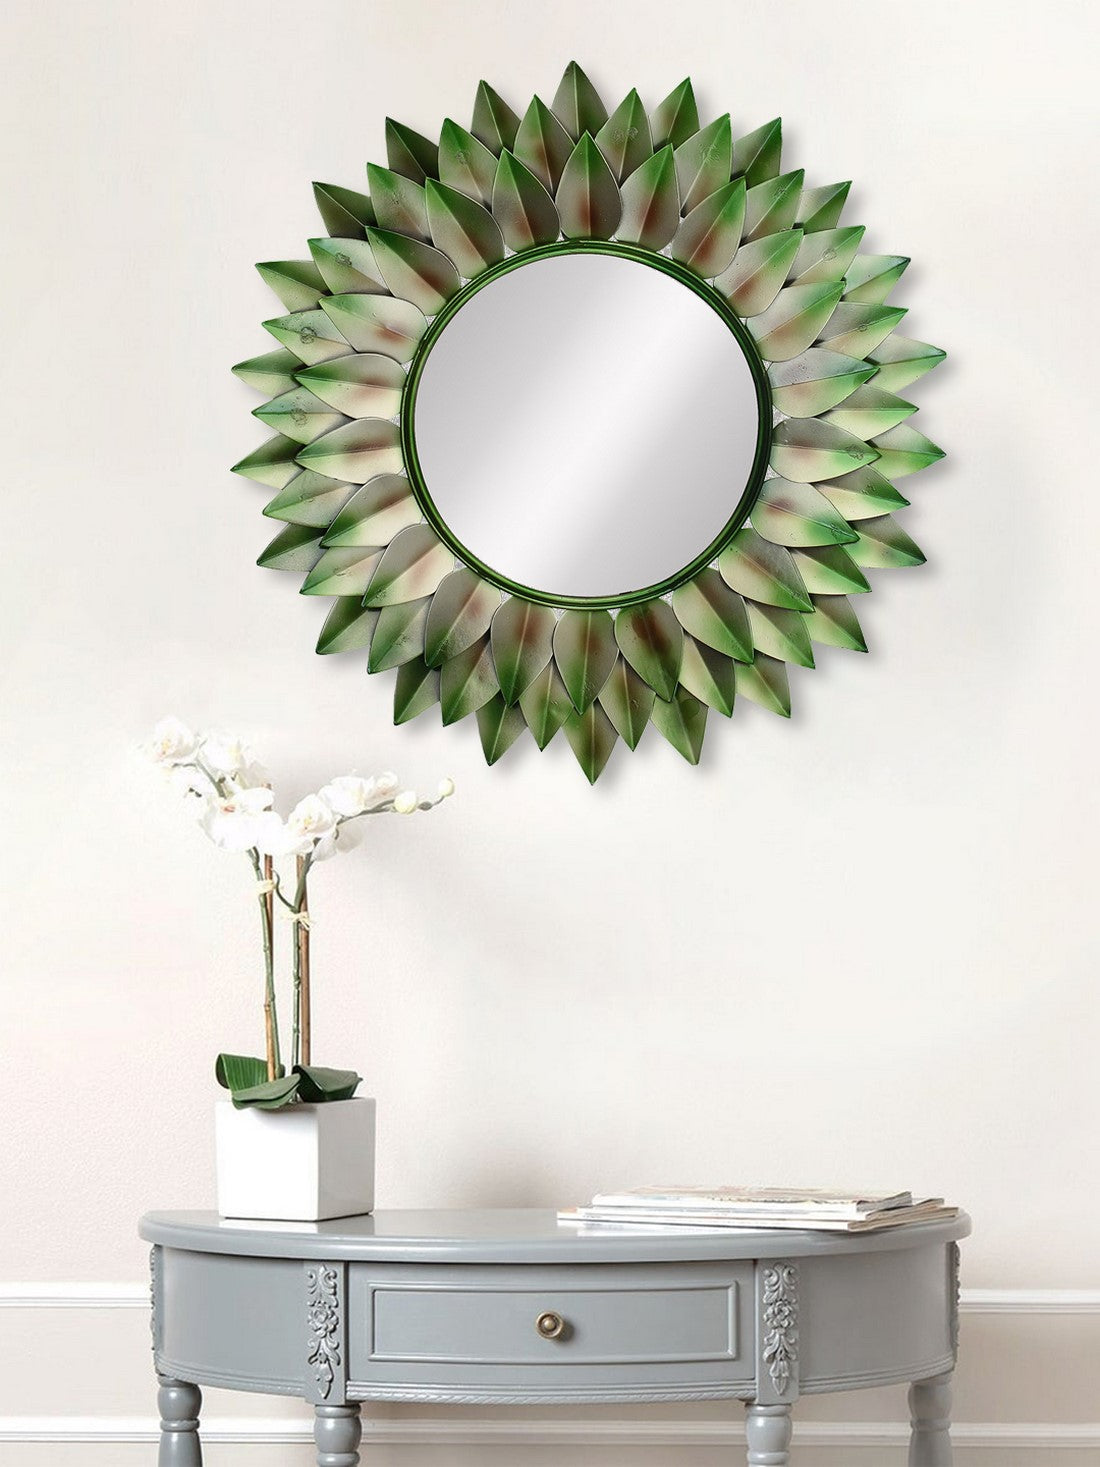 Green, Brown and Black Decorative Metal Handcarved Wall Mirror